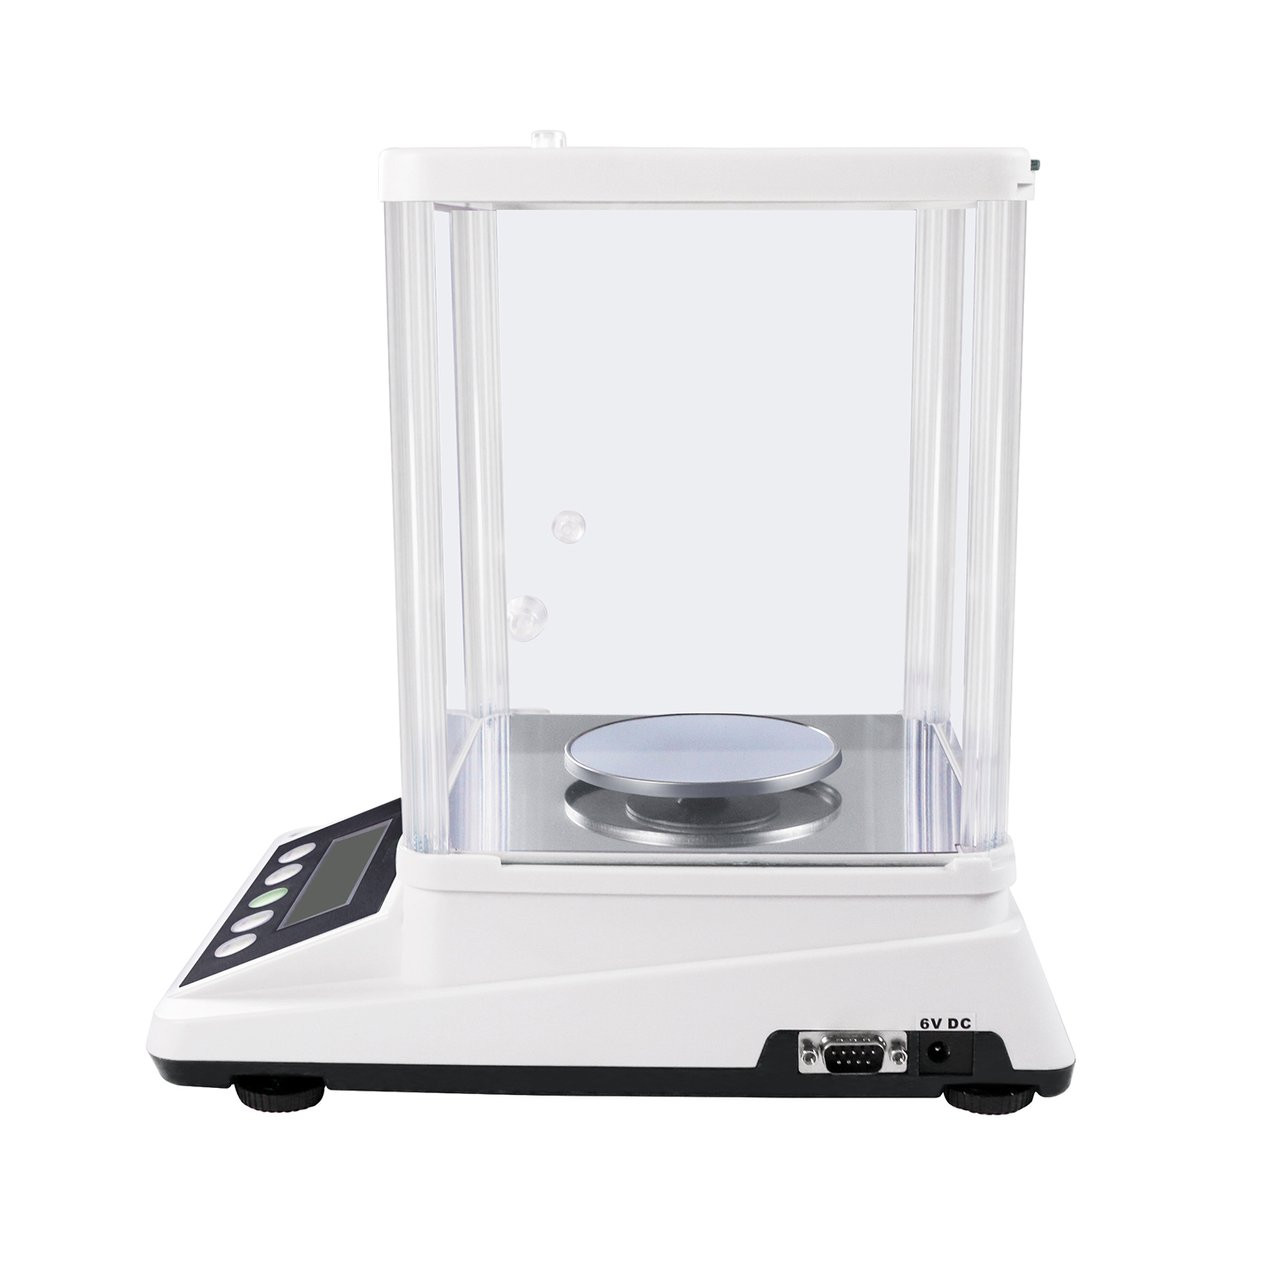 Balance tanita high accurate scale features a reverse blue backlit display  for easy visibility, calibration button, tare button